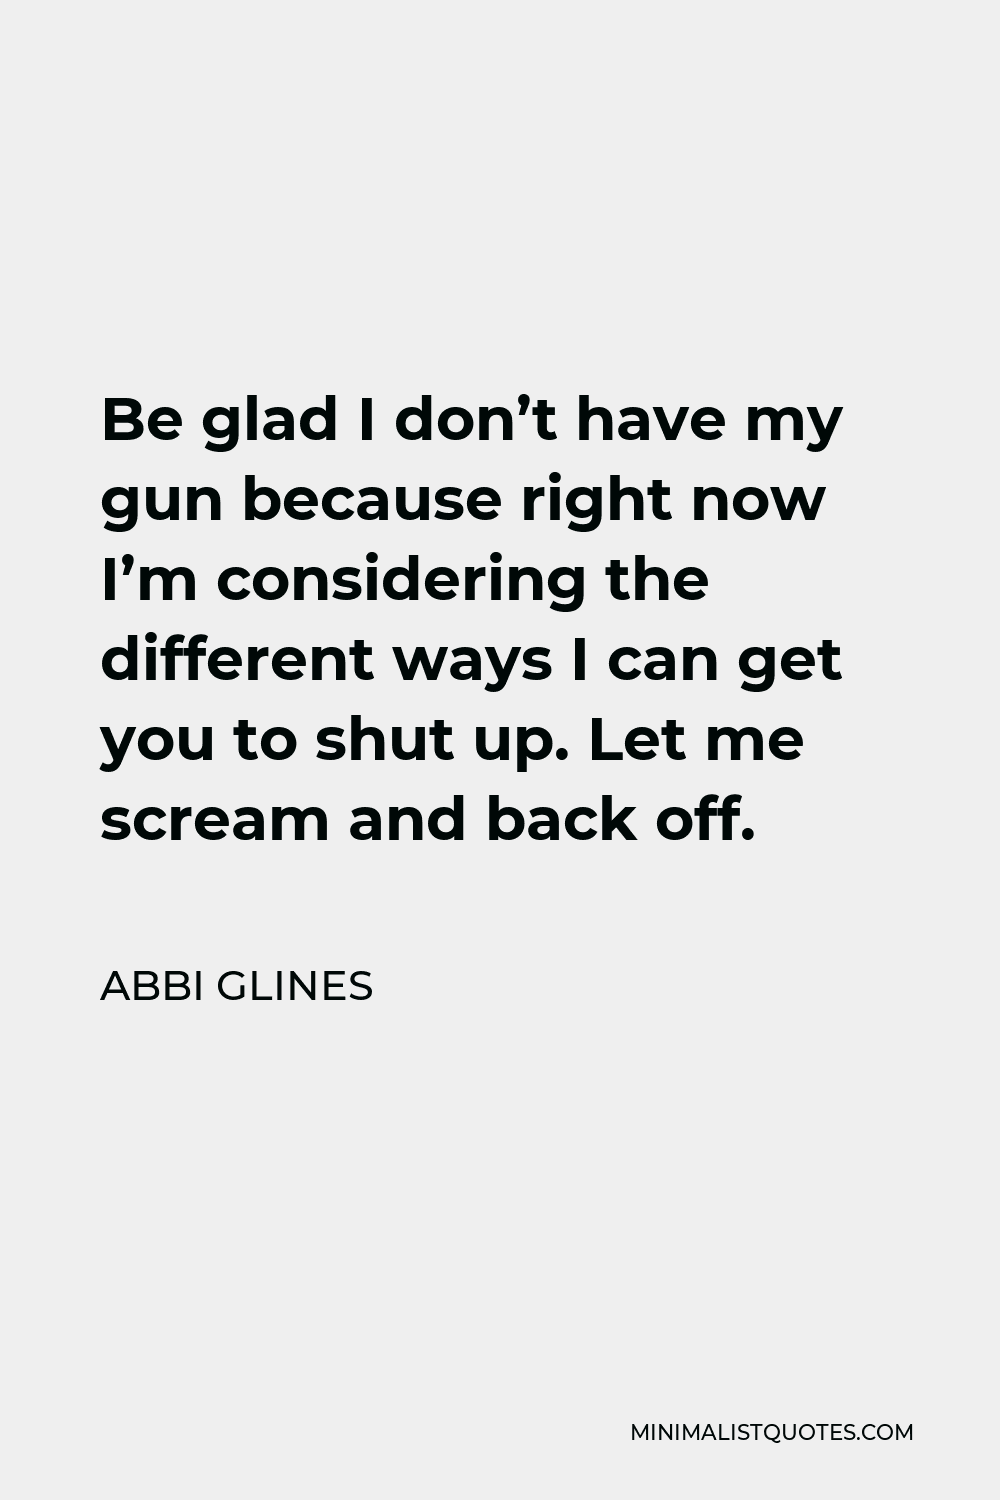 Abbi Glines Quote - Be glad I don’t have my gun because right now I’m considering the different ways I can get you to shut up. Let me scream and back off.